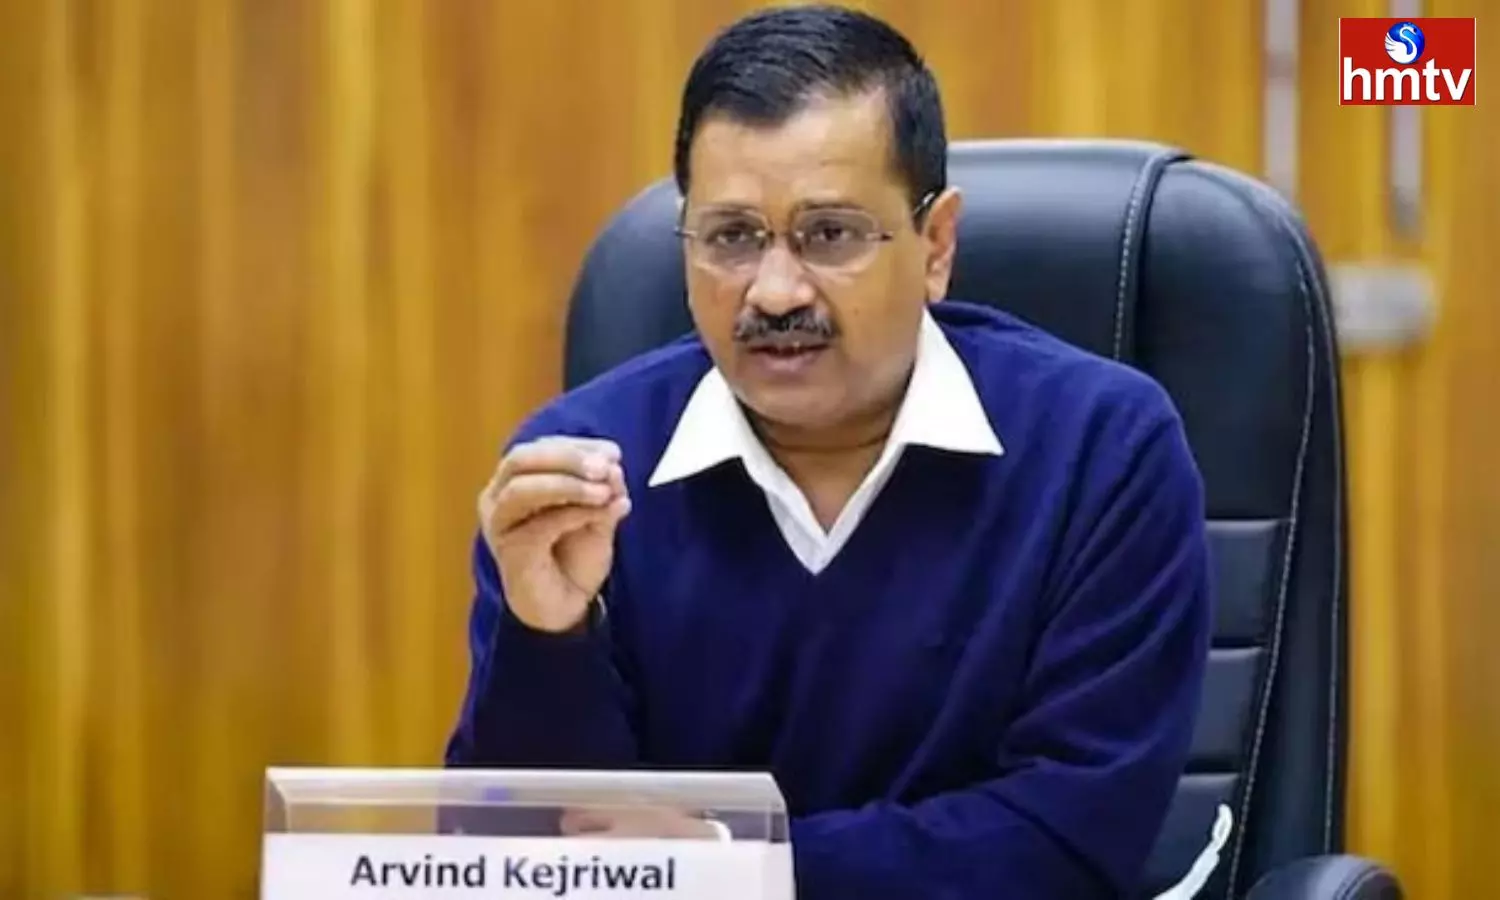 Arvind Kejriwal Gets 6th ED Summons In Liquor Scam Case